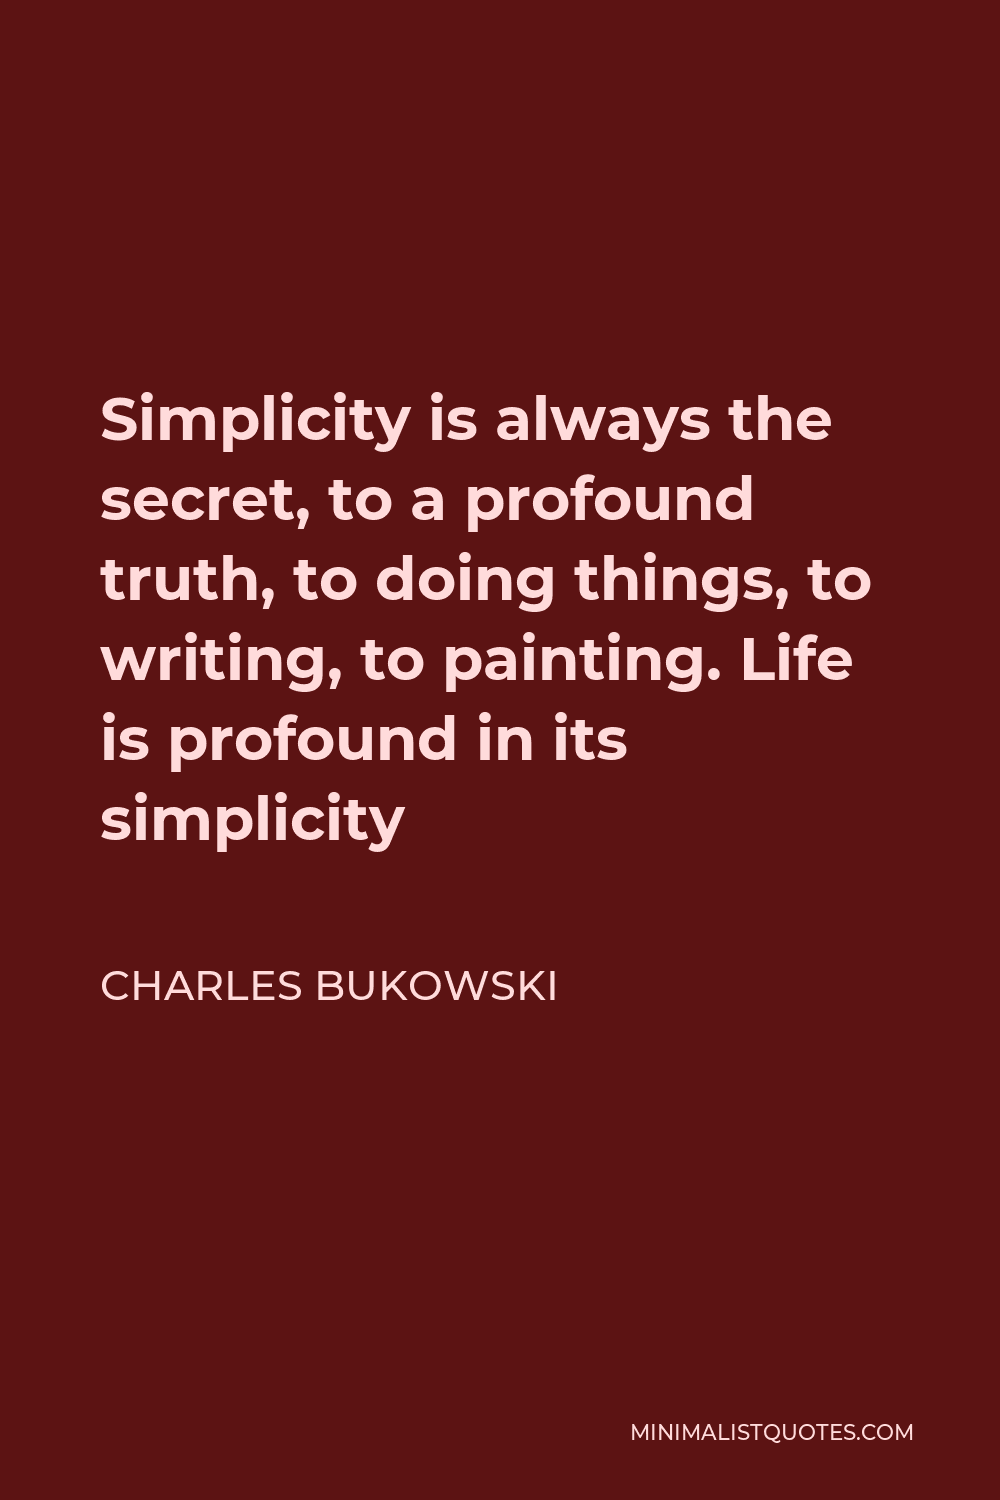 Charles Bukowski Quote - Simplicity is always the secret, to a profound truth, to doing things, to writing, to painting. Life is profound in its simplicity